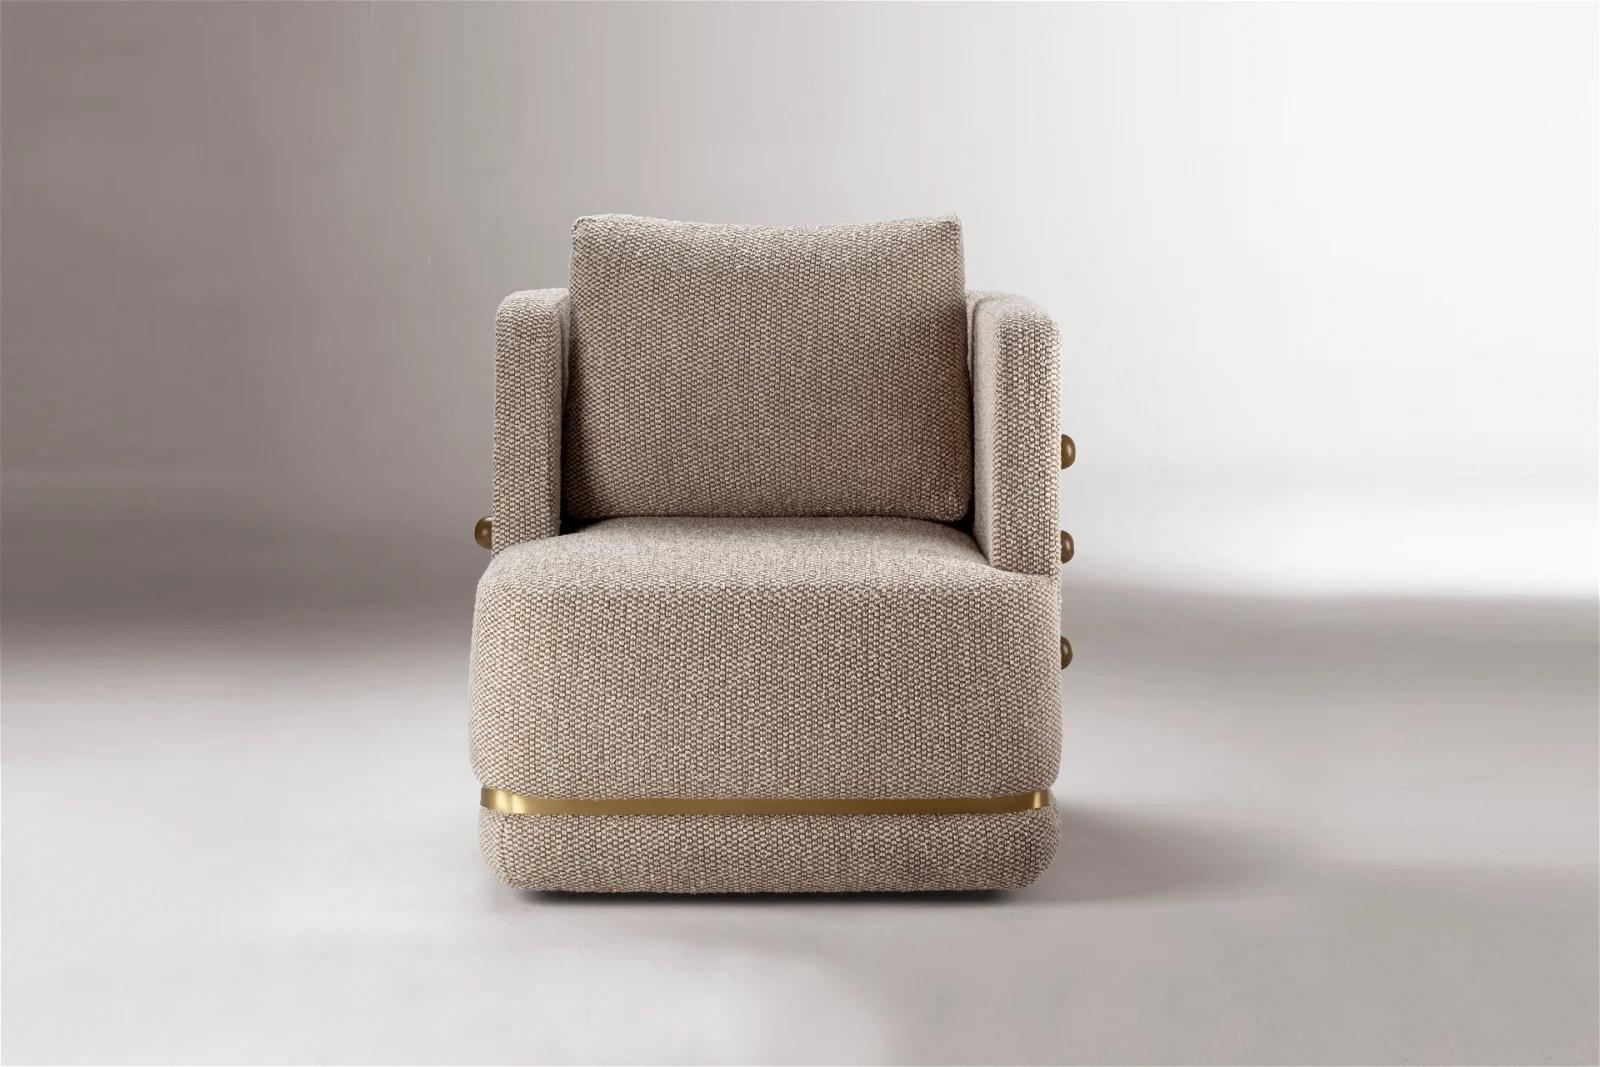 Swivel armchair with Gipsy cotton + viscose by Pierre Frey in Tauep color and satin brass detail. New and Made to Order. 

If you are planning on ordering an upholstery item with COM upholstery, please follow these instructions: 
- Let us know that